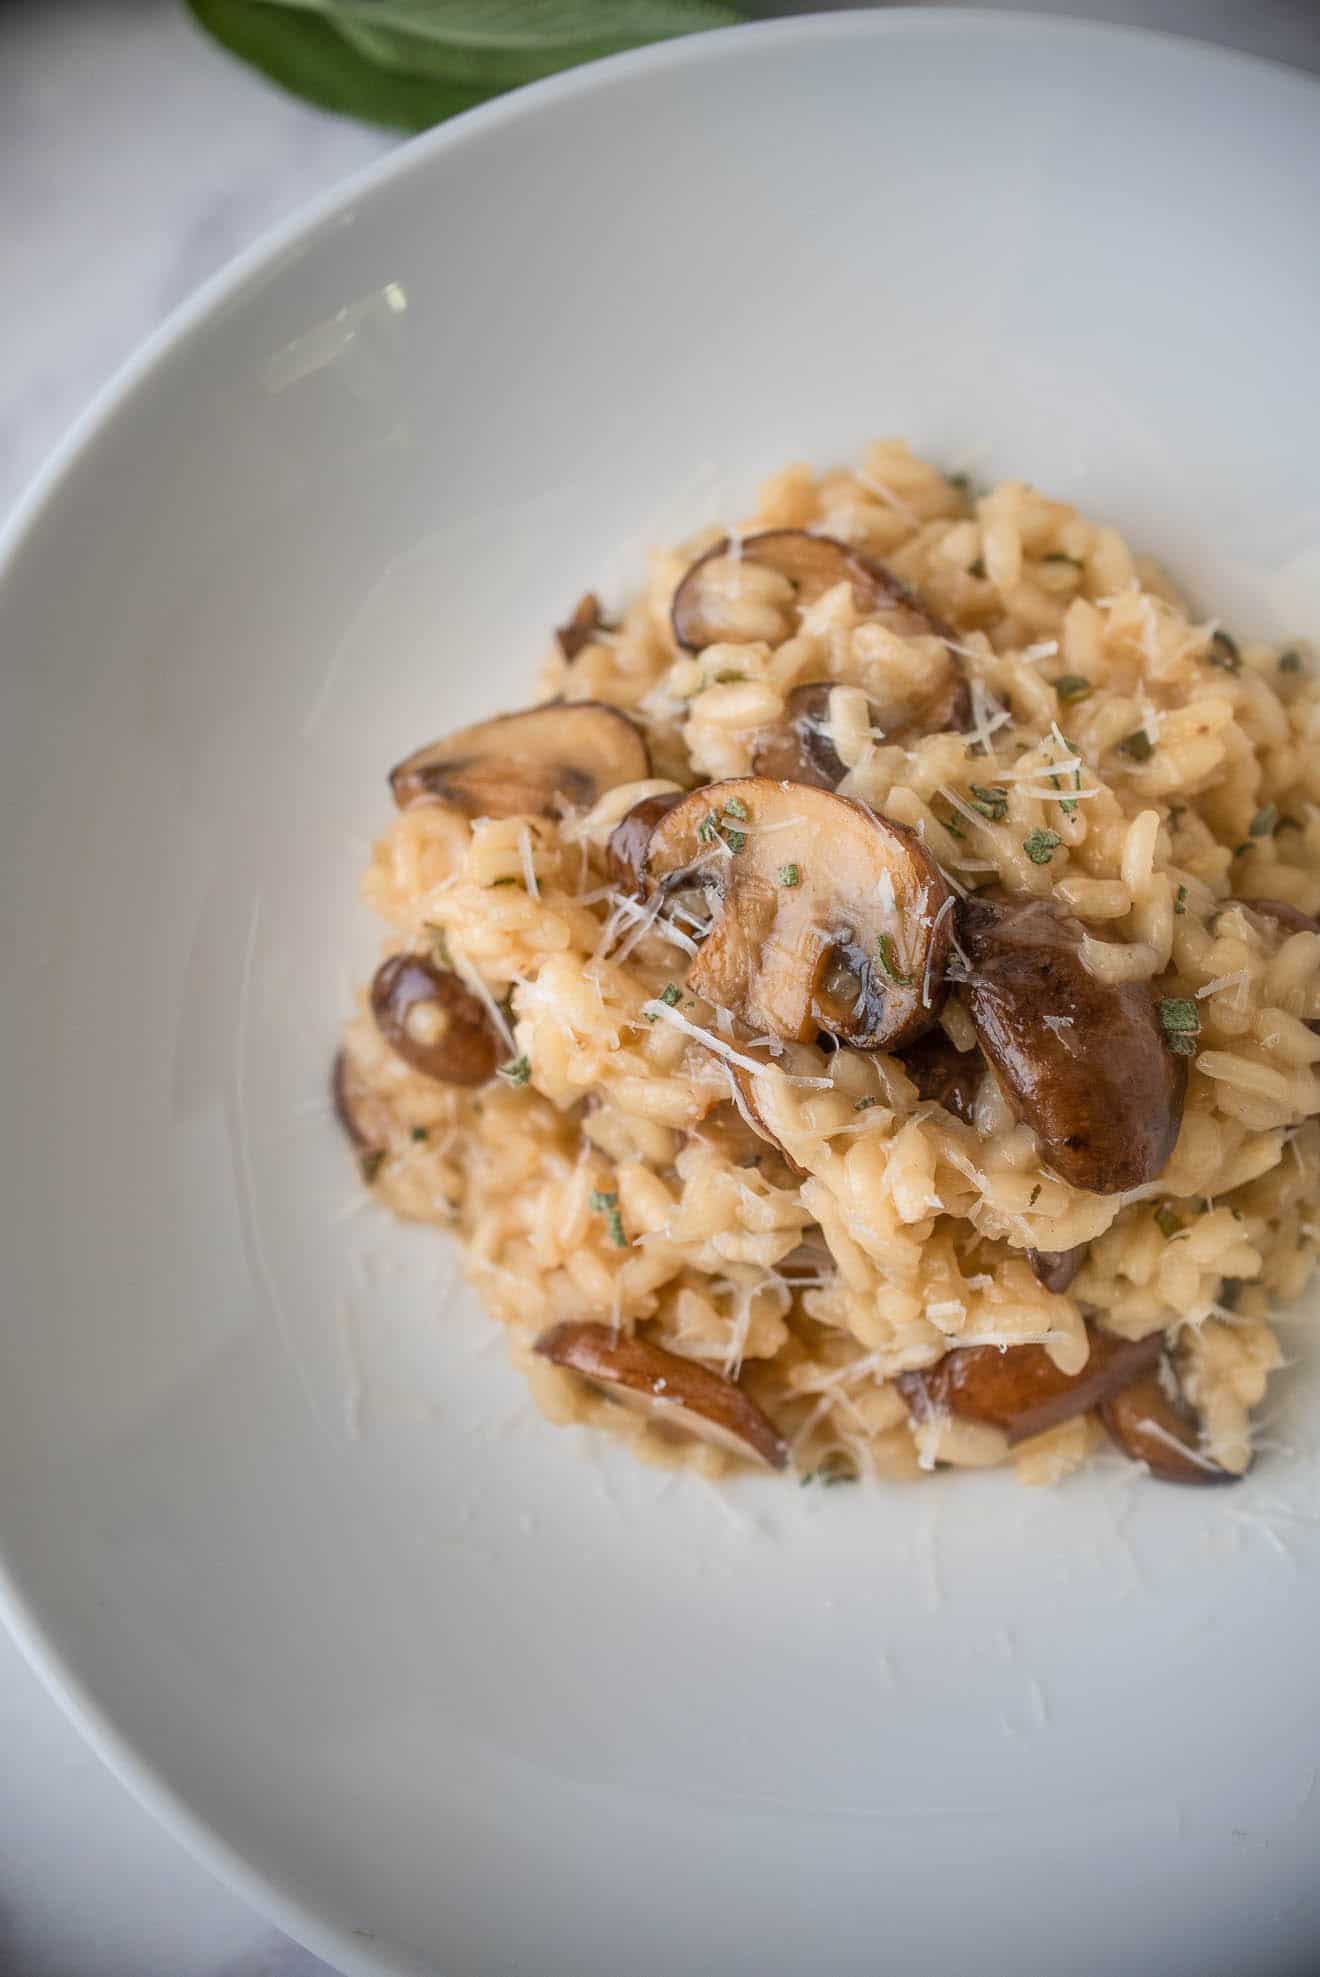 A closeup of the meaty mushrooms in the risotto